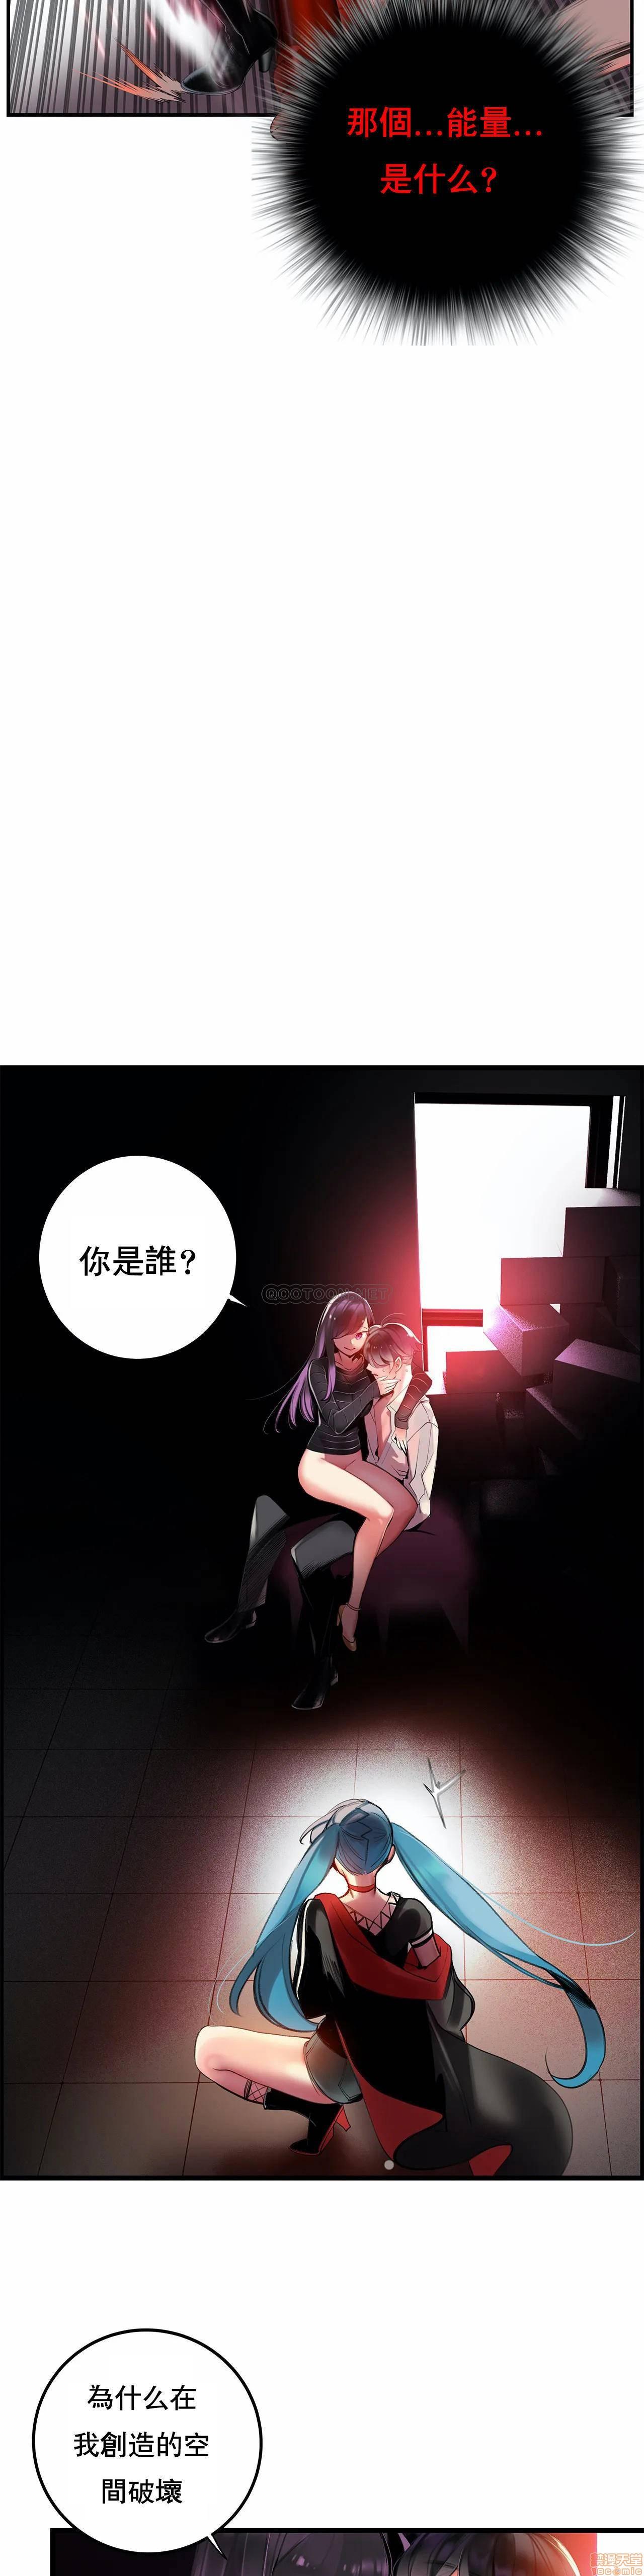 [Juder] Lilith`s Cord (第二季) Ch.77-93 end [Chinese] 197